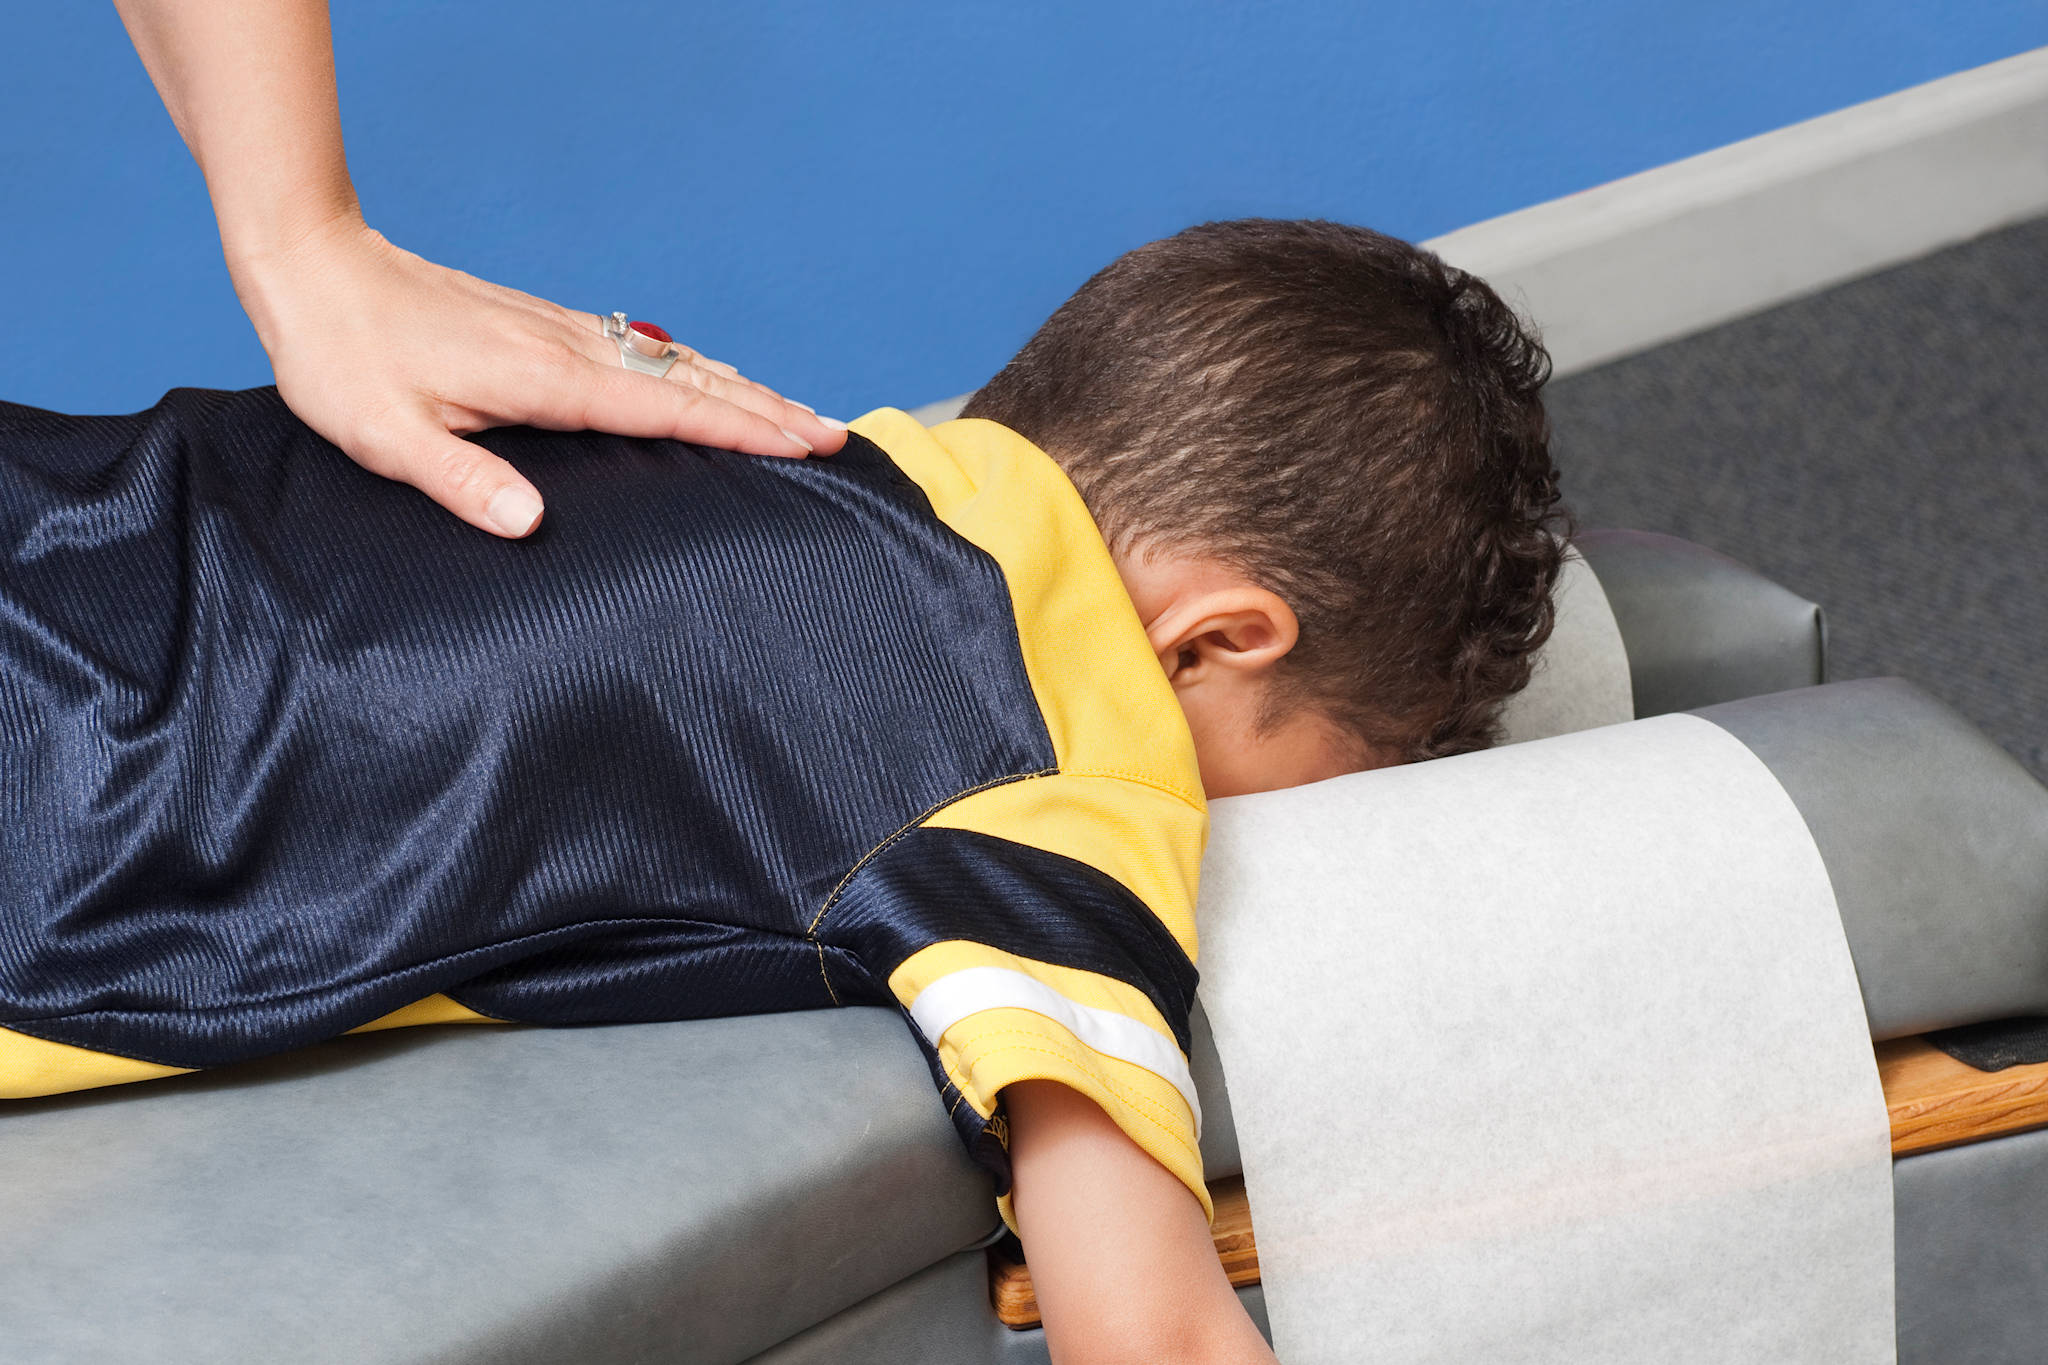 Kids and Back Pain